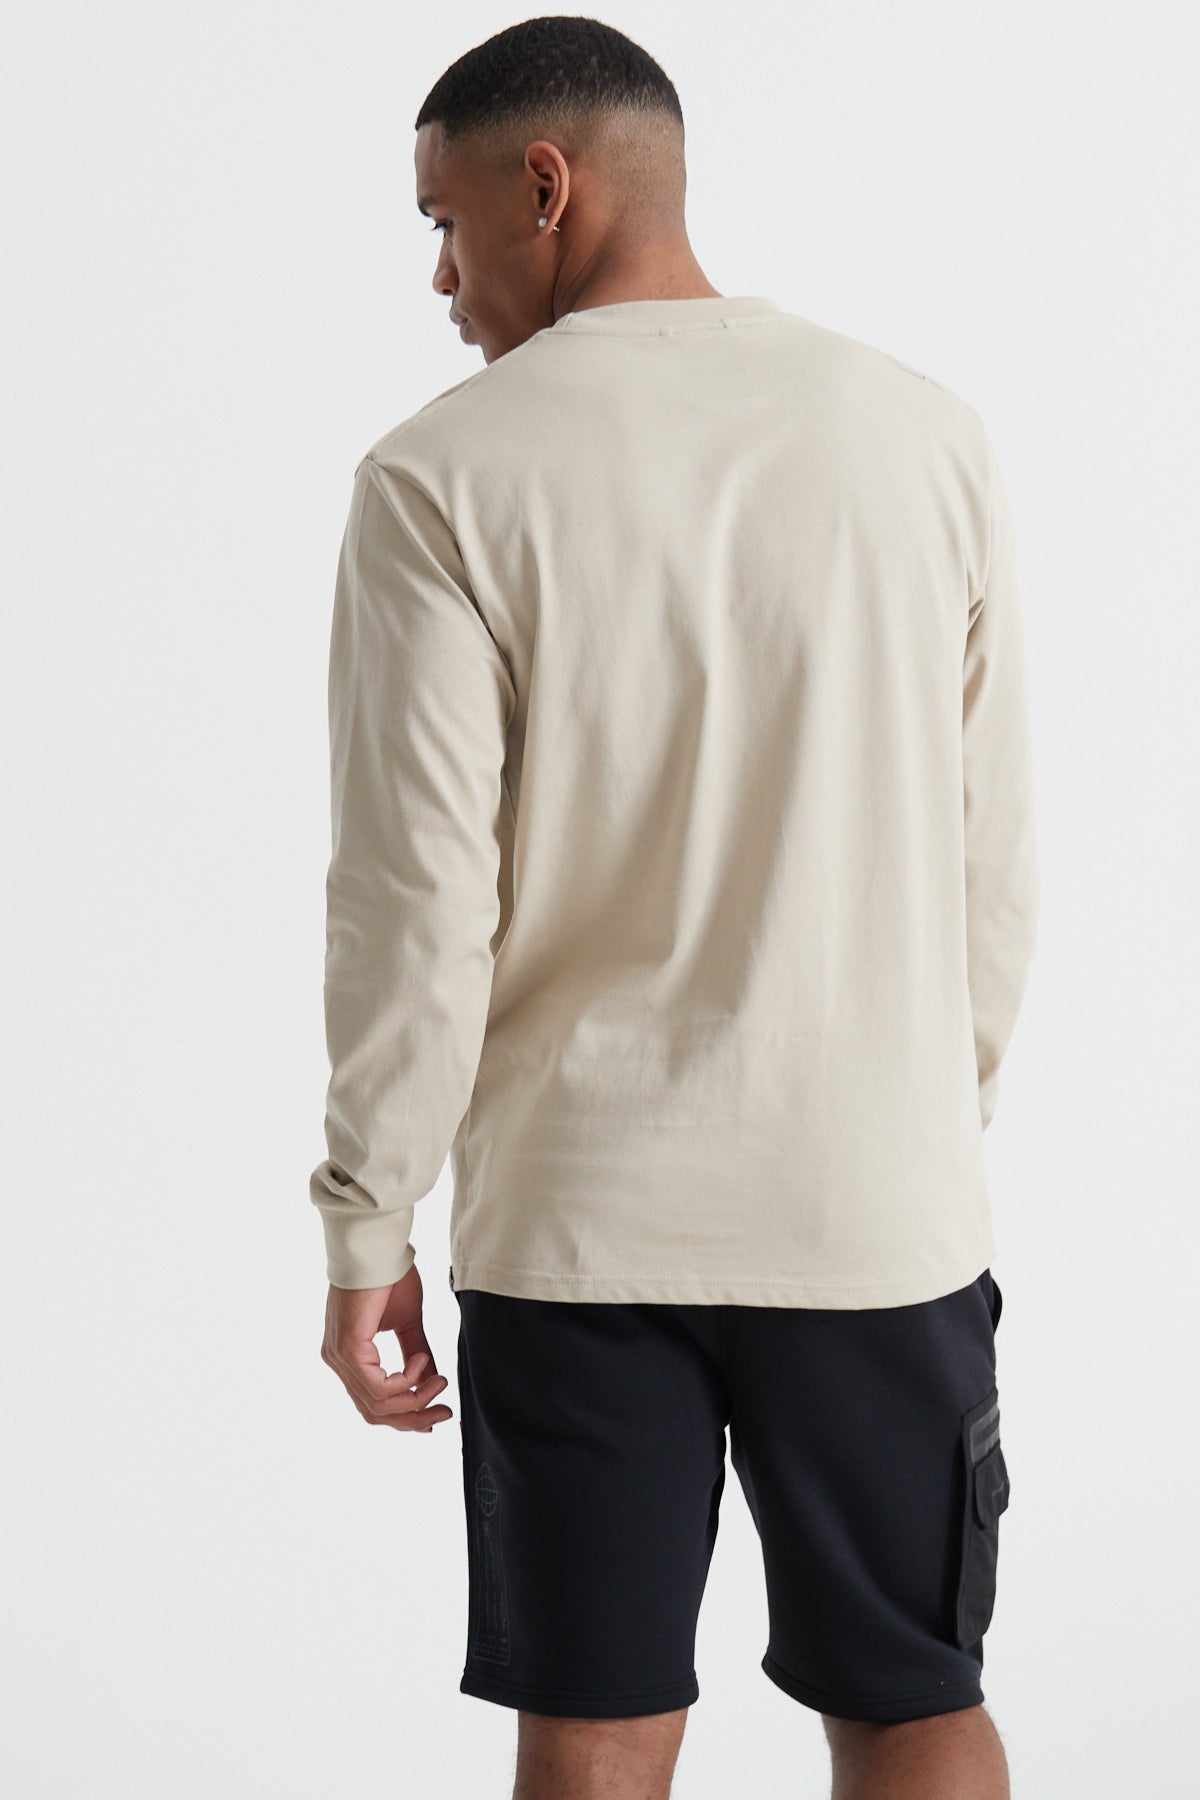 Off The Grid Long Sleeve T-shirt - Sand Stone